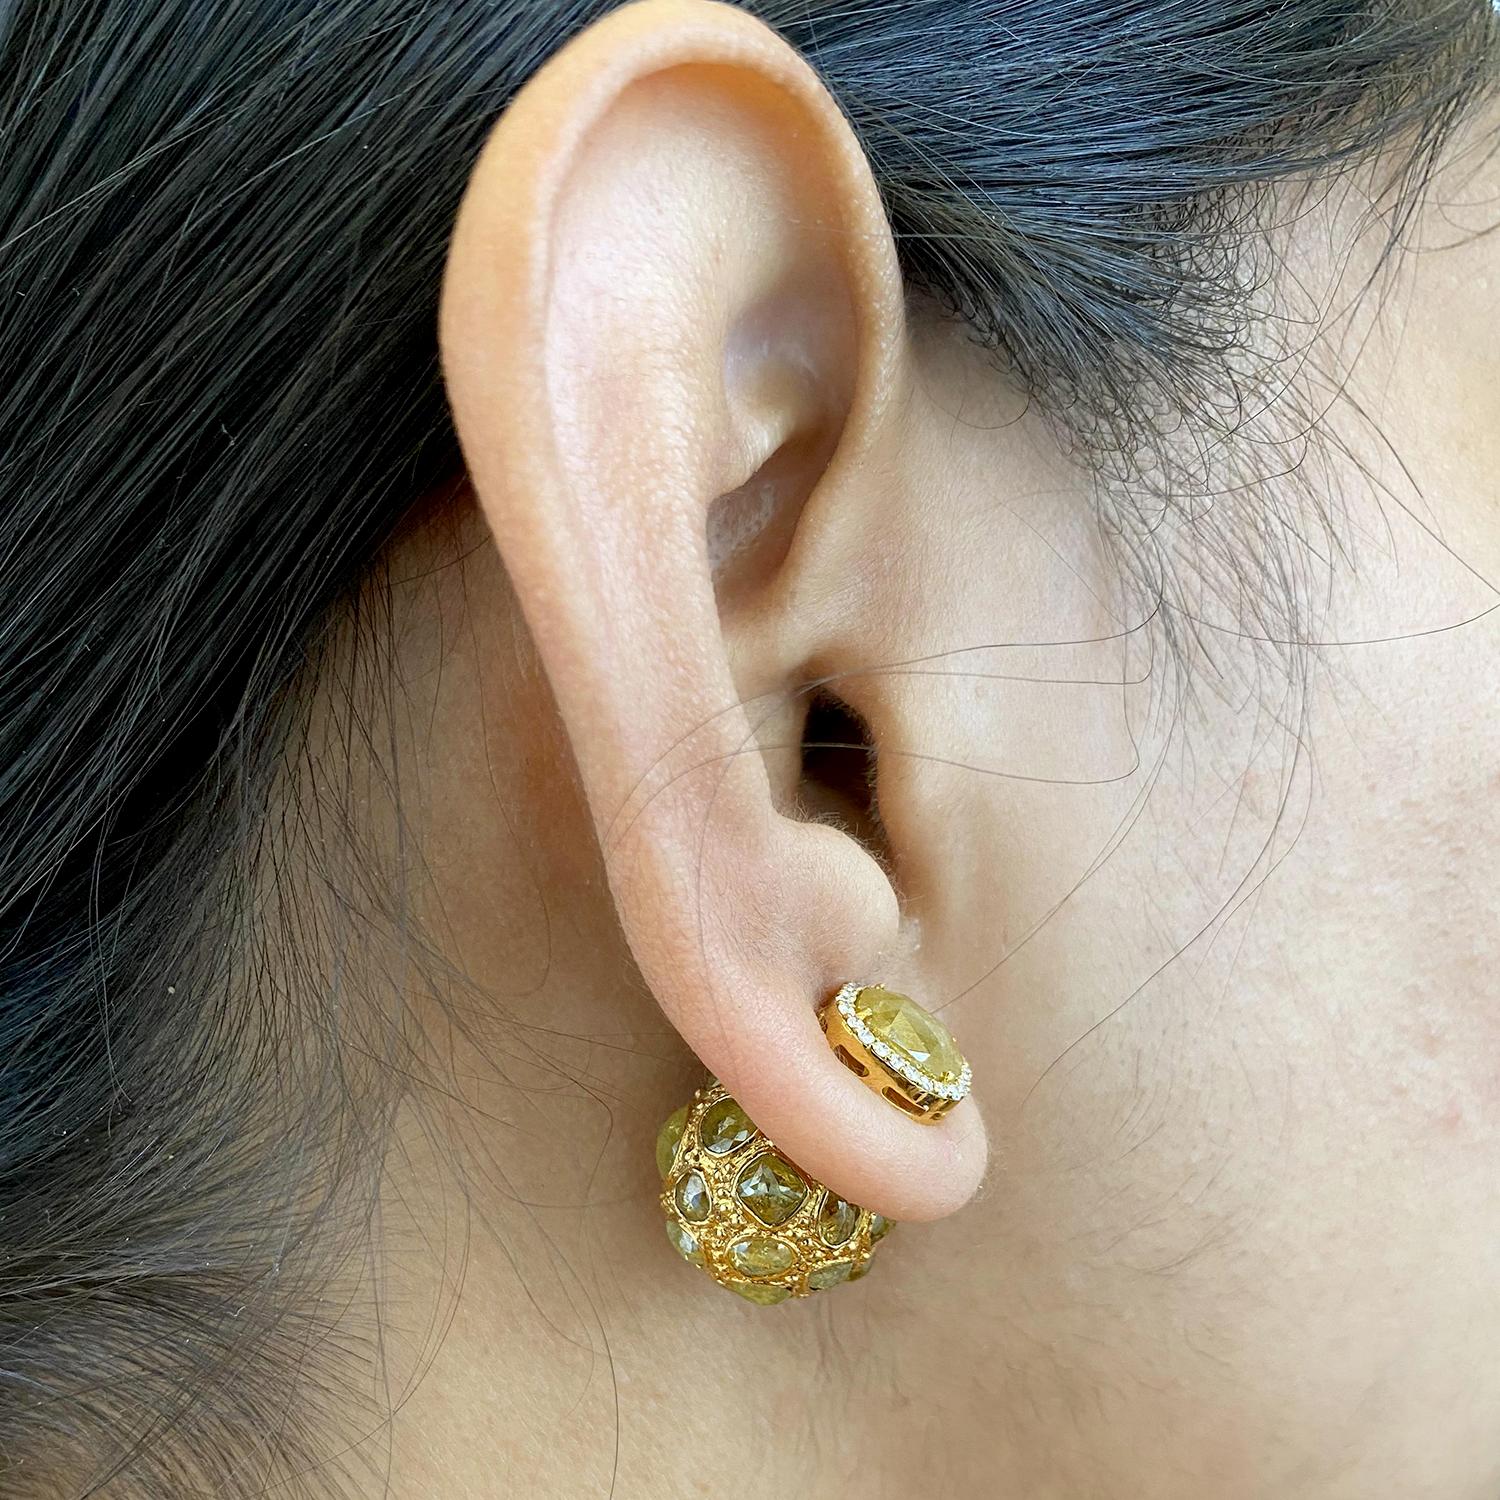 These earrings are made of 18 karat gold and feature diamonds in the form of ice diamond . Ice diamonds are the most popular choices for diamond jewelry. The combination of the gleaming gold and sparkling diamonds gives these earrings a classic and